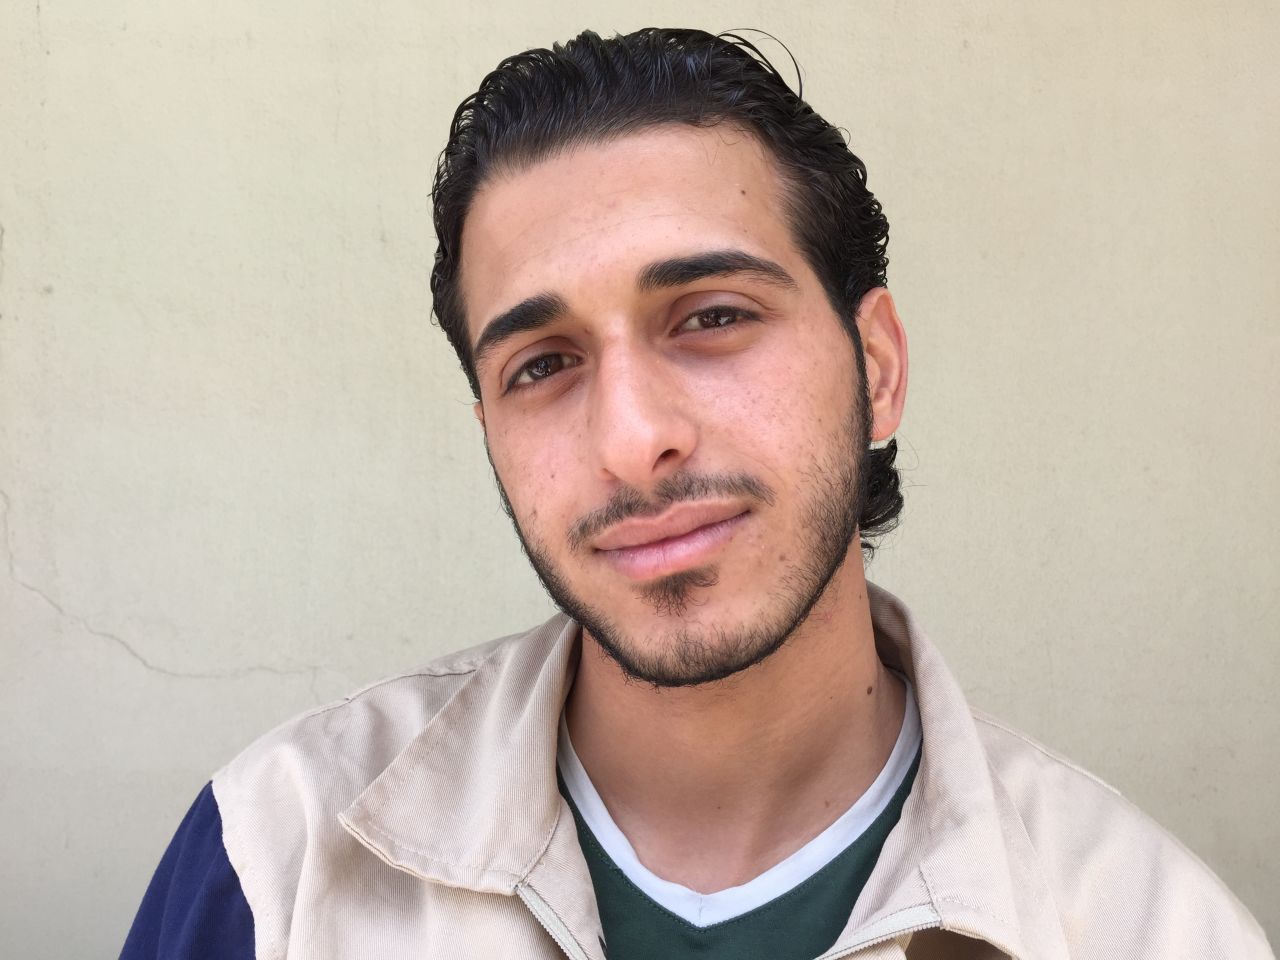 Mohammad Altouma, 22. First-year university student, studying mechanical aviation engineering. "The town square in my village was bombed by the regime. It hit my uncle's house. I rescued my aunt, uncle and 5-year-old girl cousin, but her two brothers were killed."